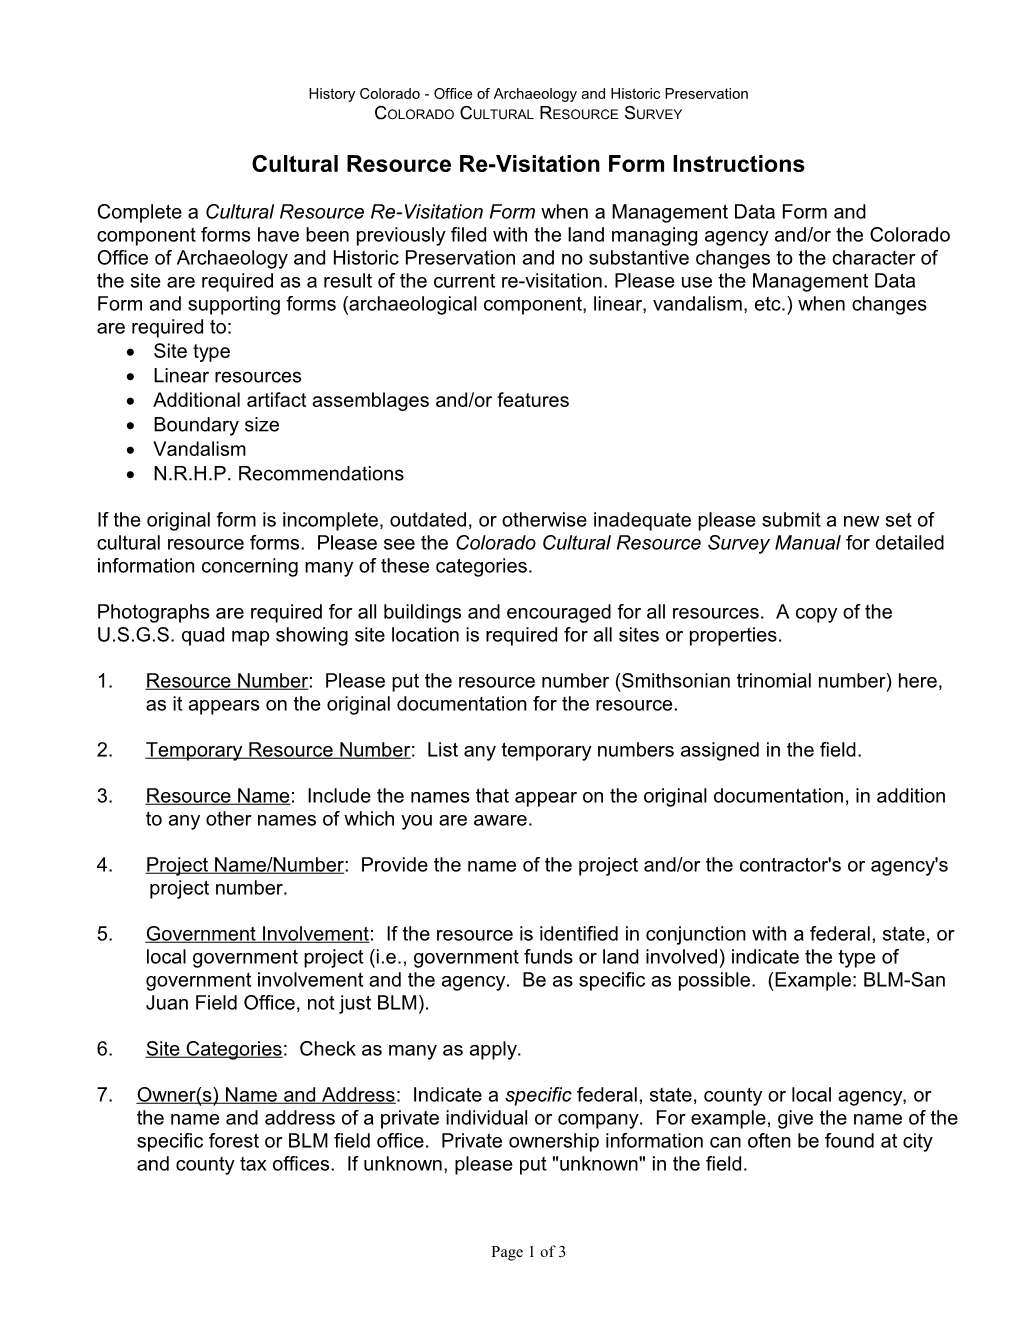 Cultural Resource Reevaluation Form Instructions - Word Version